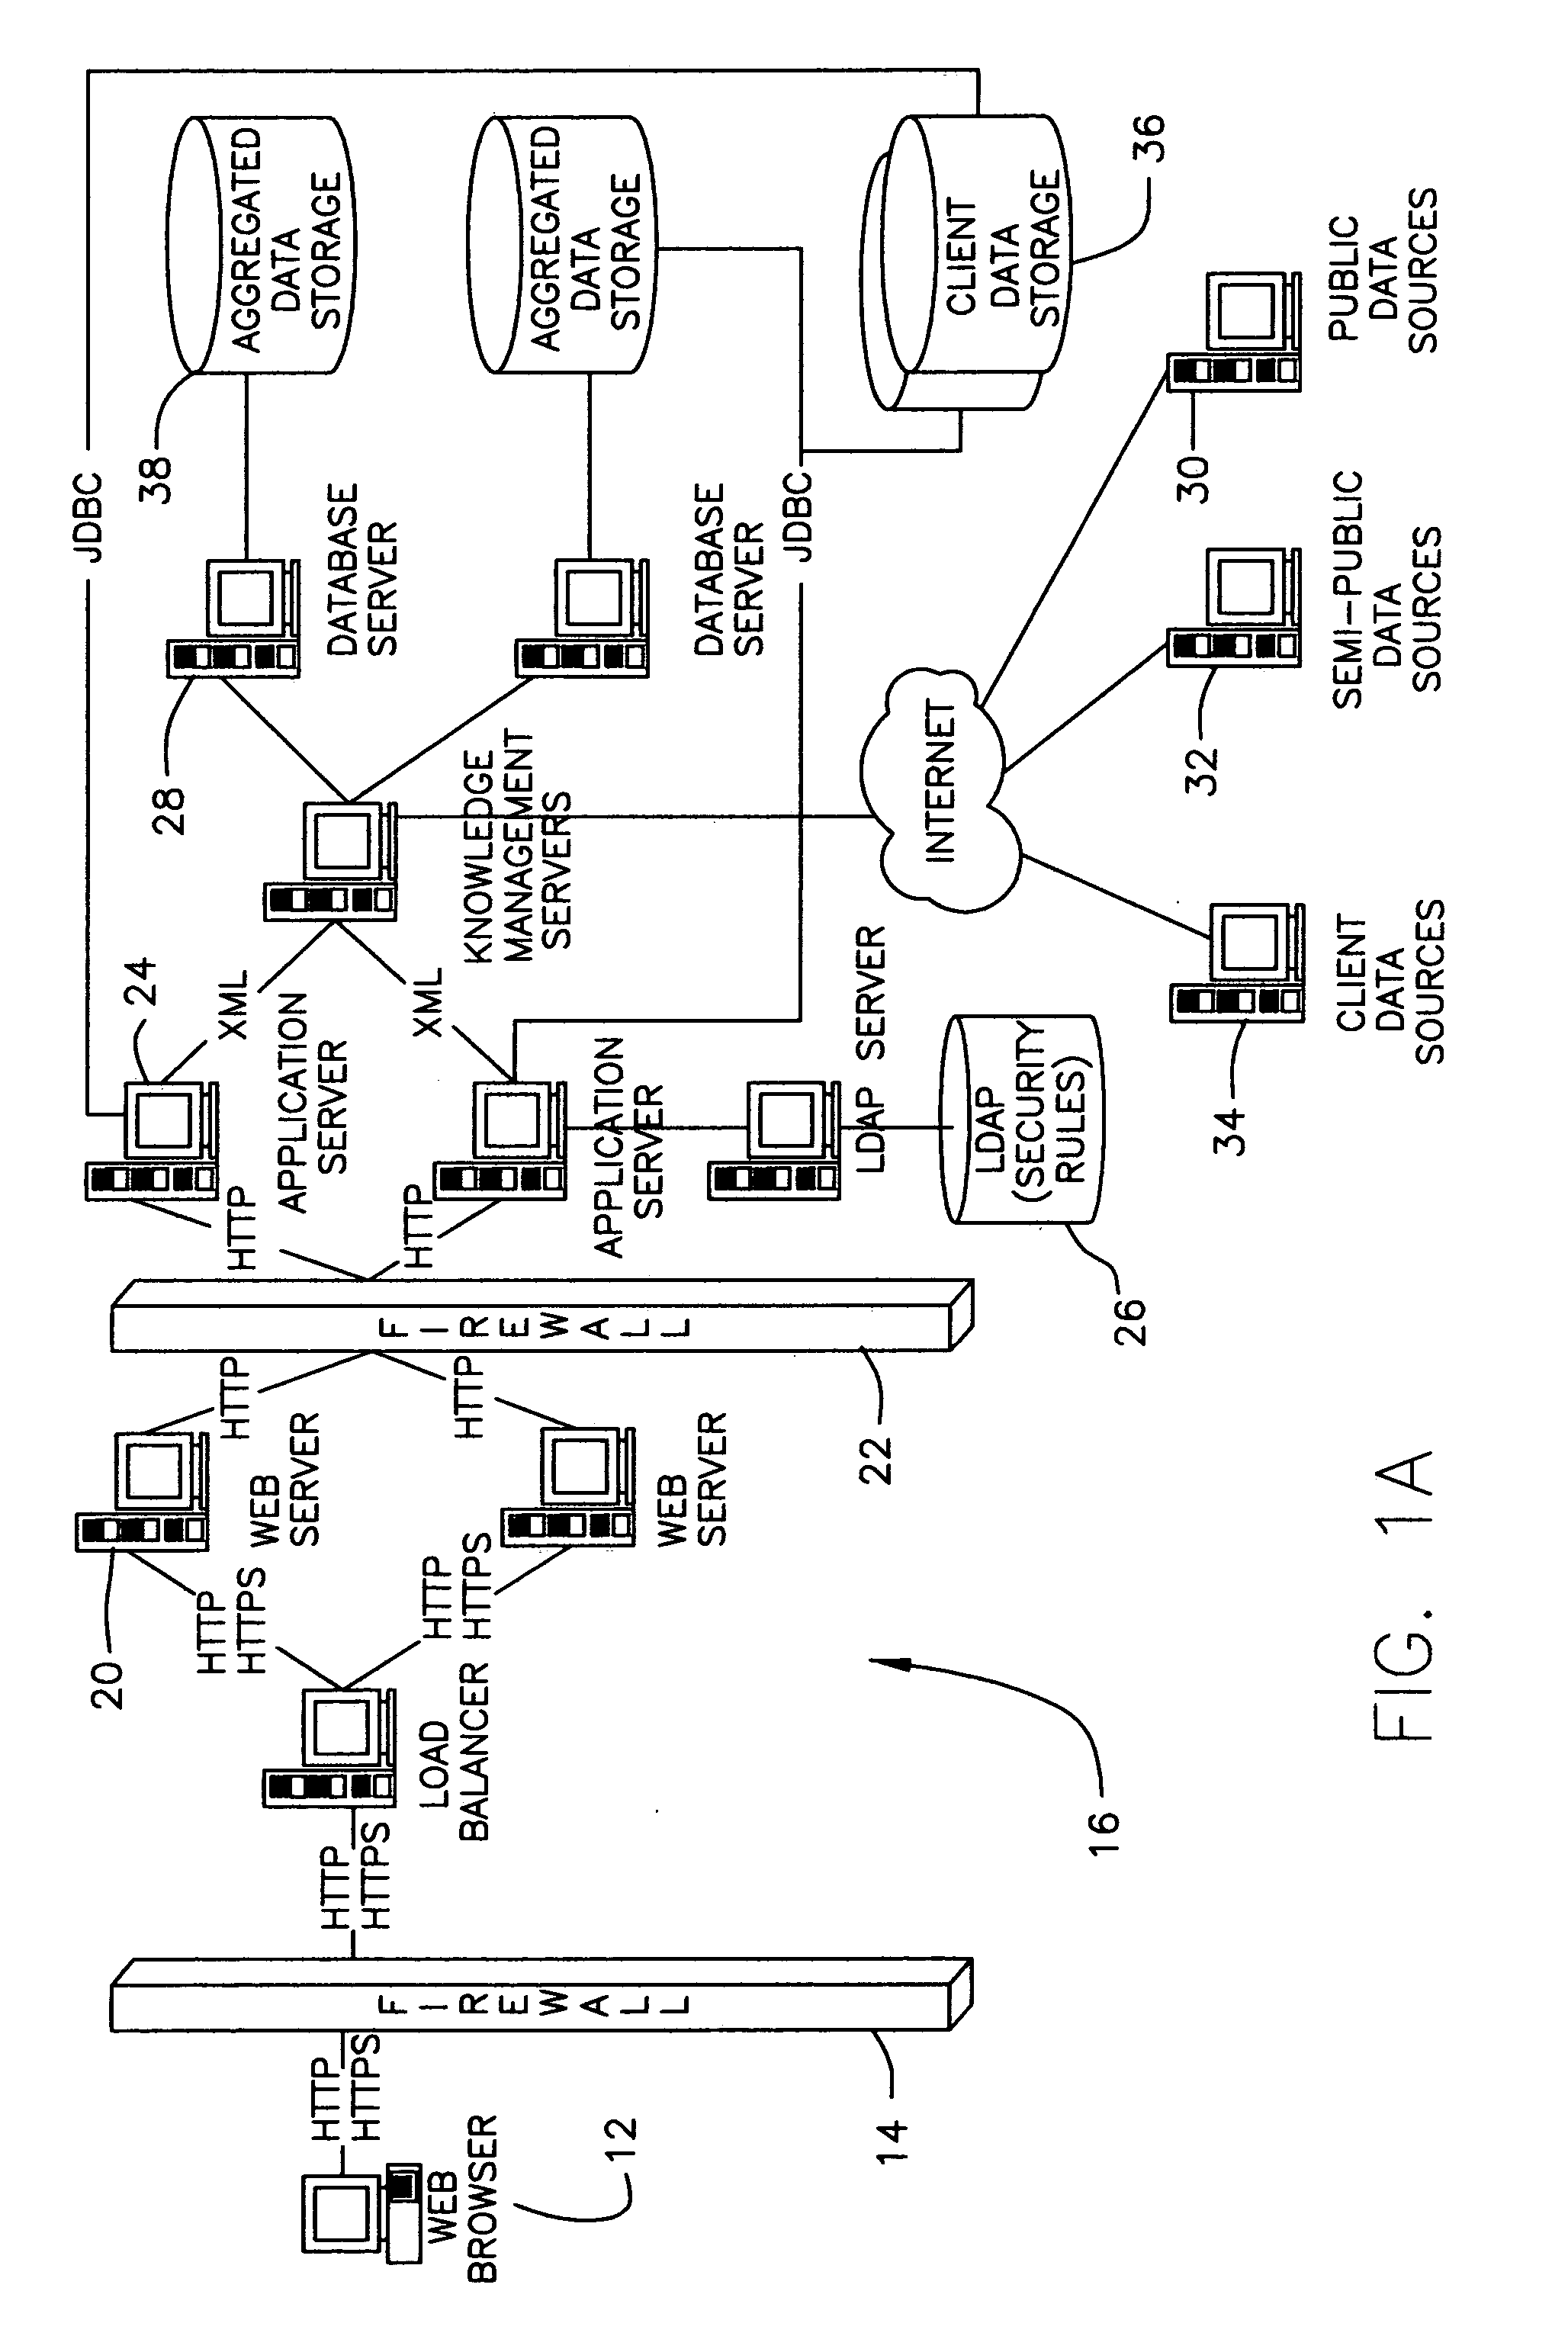 System and method for providing global information on risks and related hedging strategies